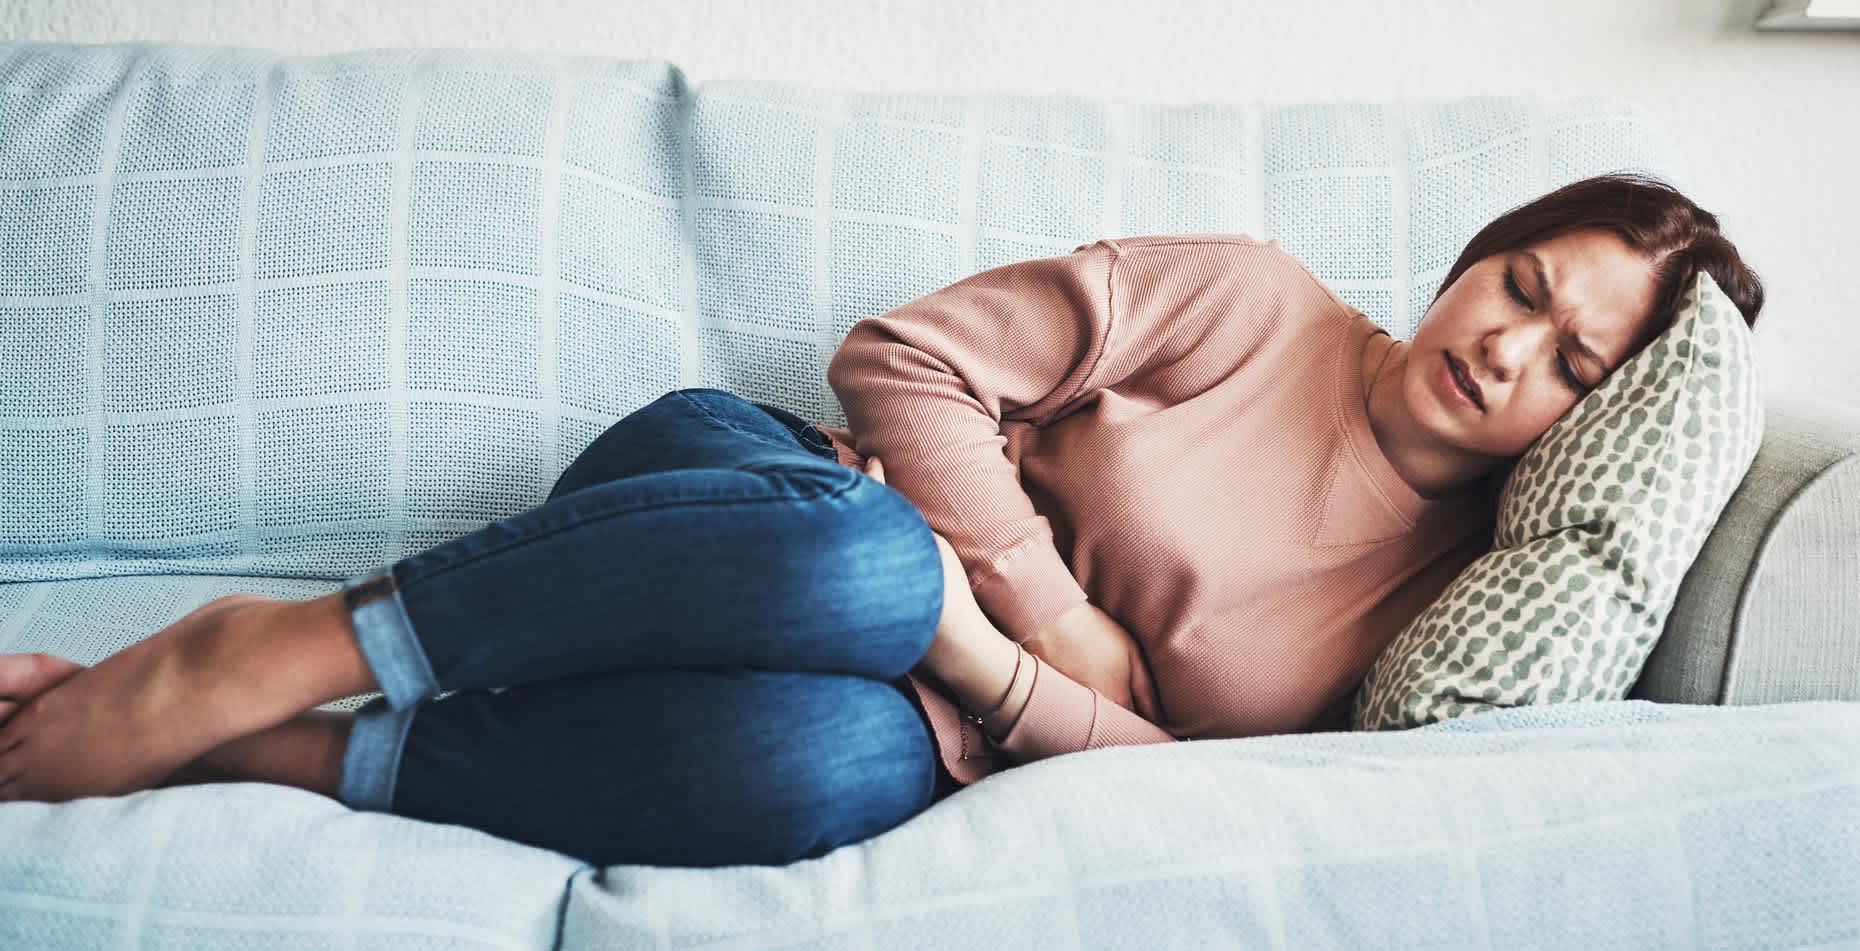 Woman with uncomfortable symptoms lying on couch and wondering how long a UTI can go untreated